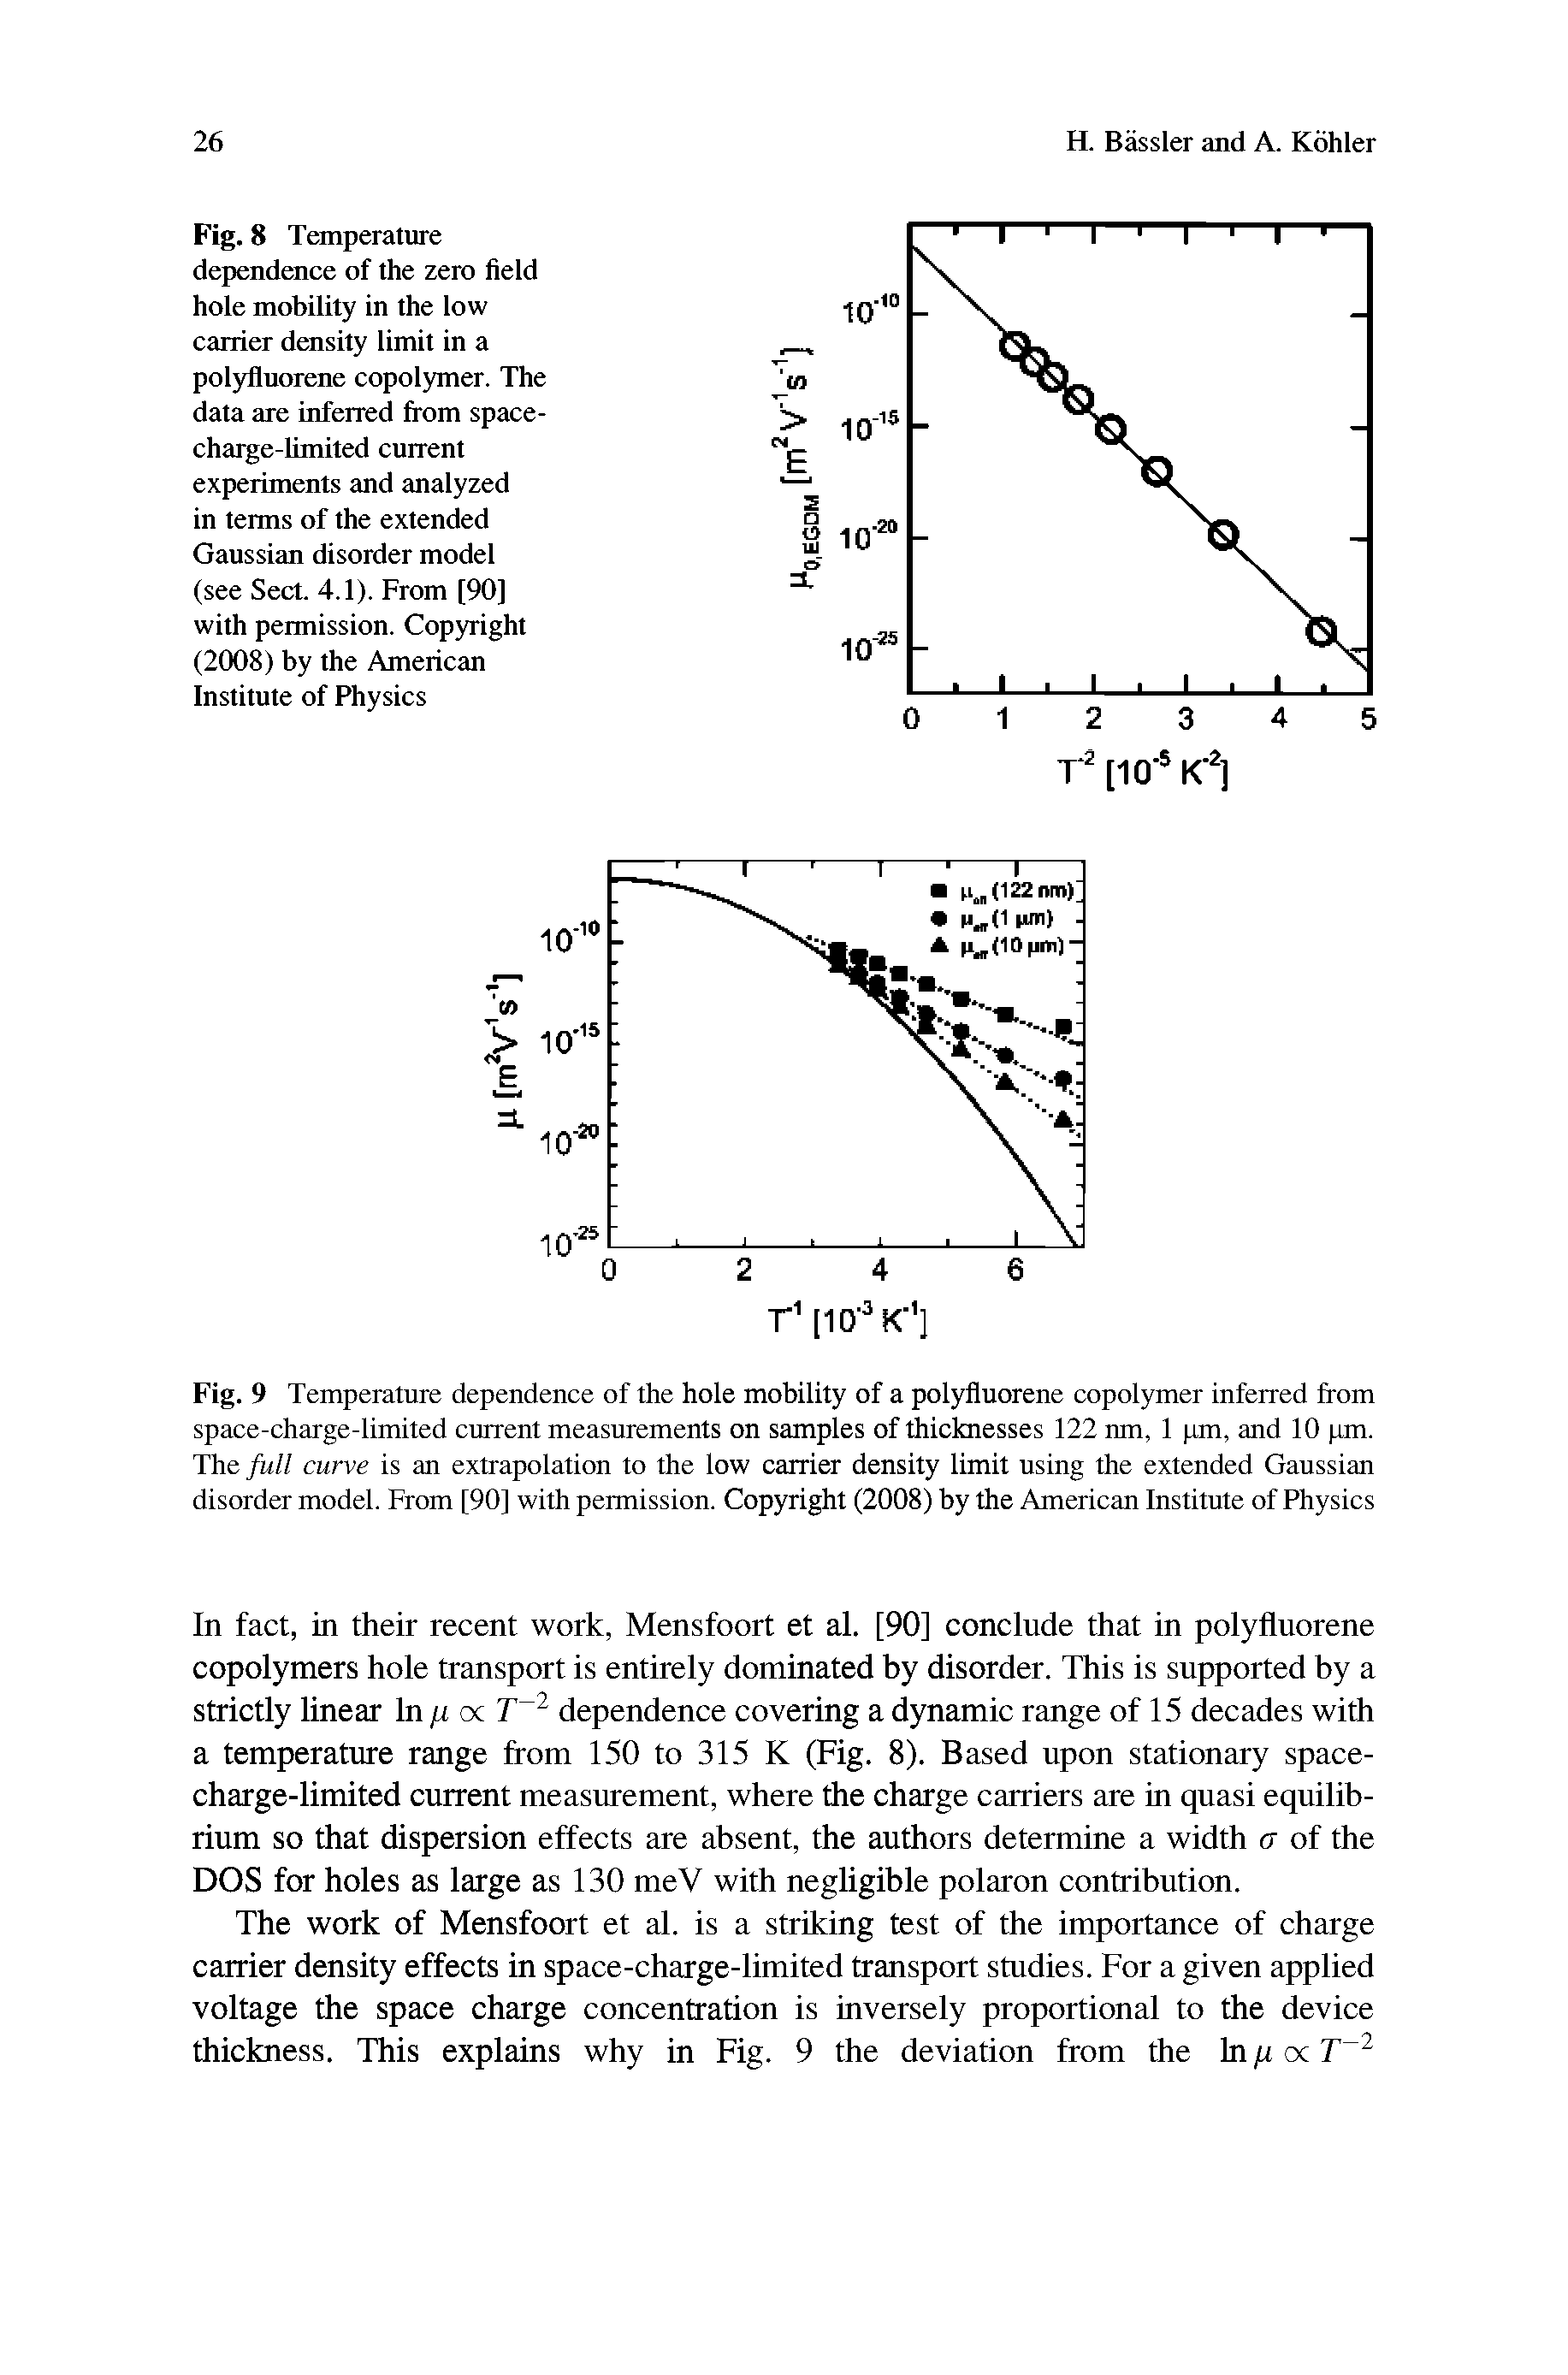 Fig. 8 Temperature dependence of the zero field hole mobility in the low carrier density limit in a polyfluorene copolymer. The data are inferred from space-charge-limited current experiments and analyzed in terms of the extended Gaussian disorder model (see Sect. 4.1). From [90] with permission. Copyright (2008) by the American Institute of Physics...